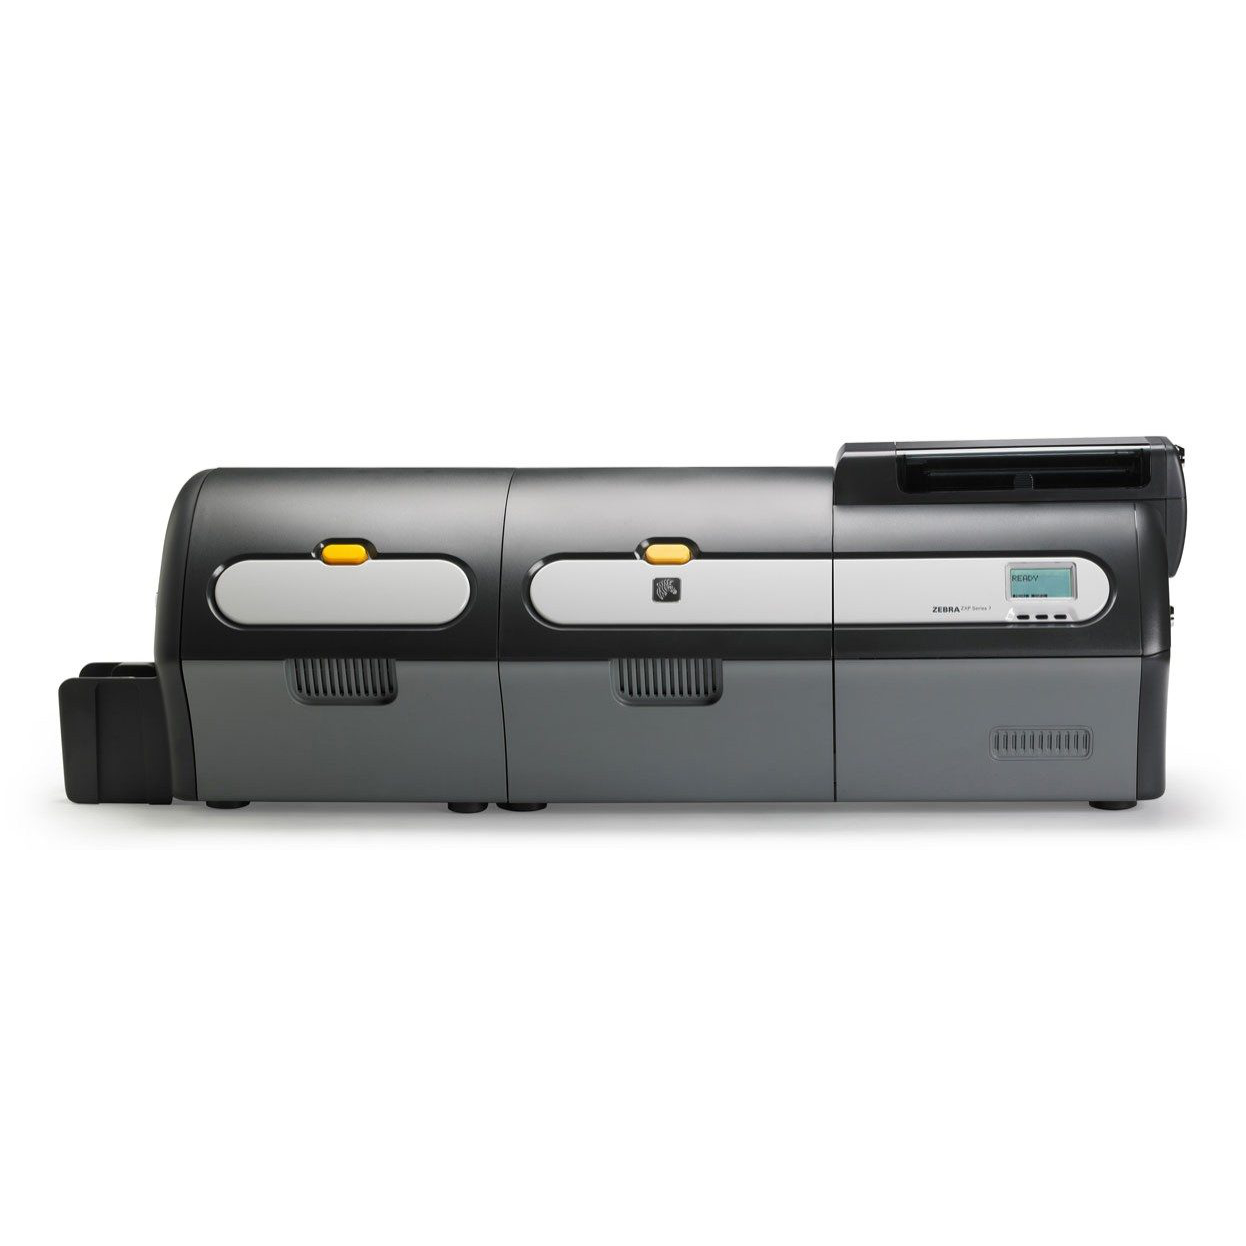 Zebra ZXP Series 7 with Laminator, Front View